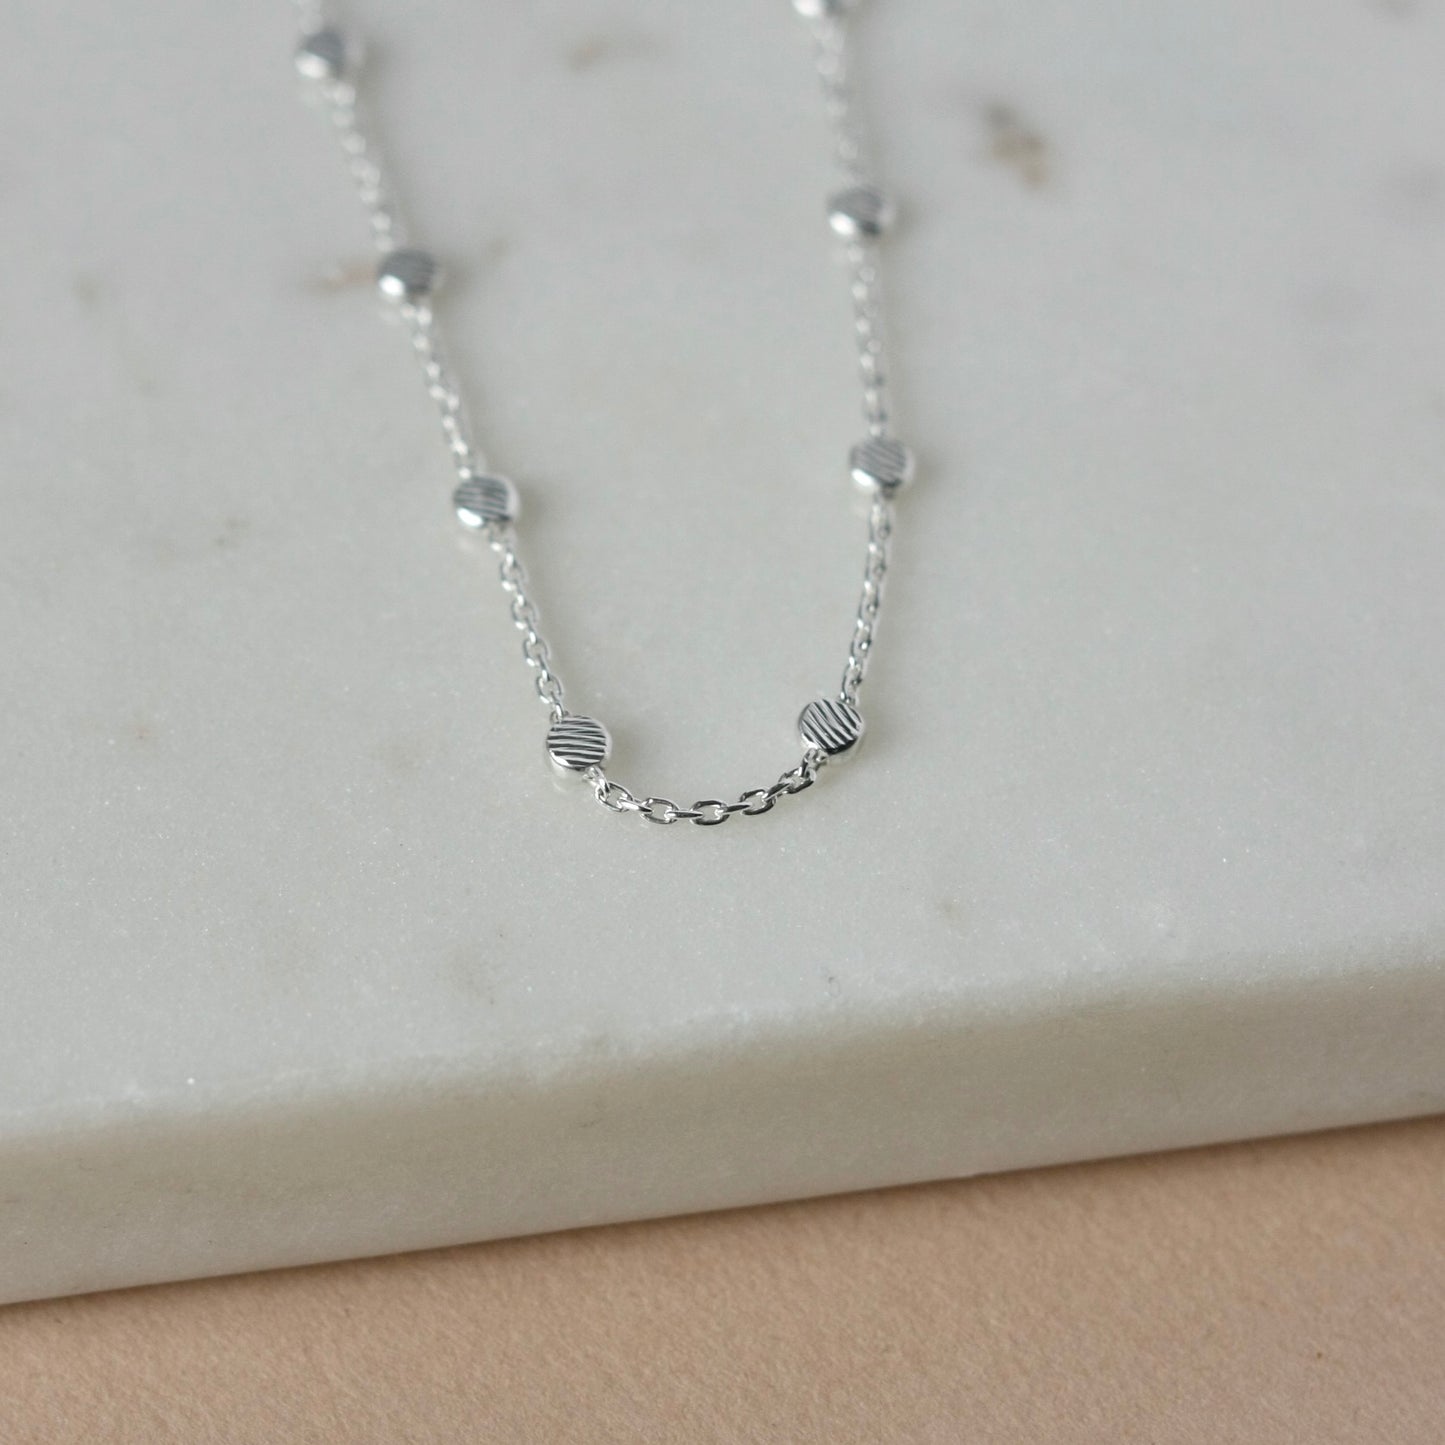 Dainty Minimalist Beaded Sterling Silver Chain Necklace